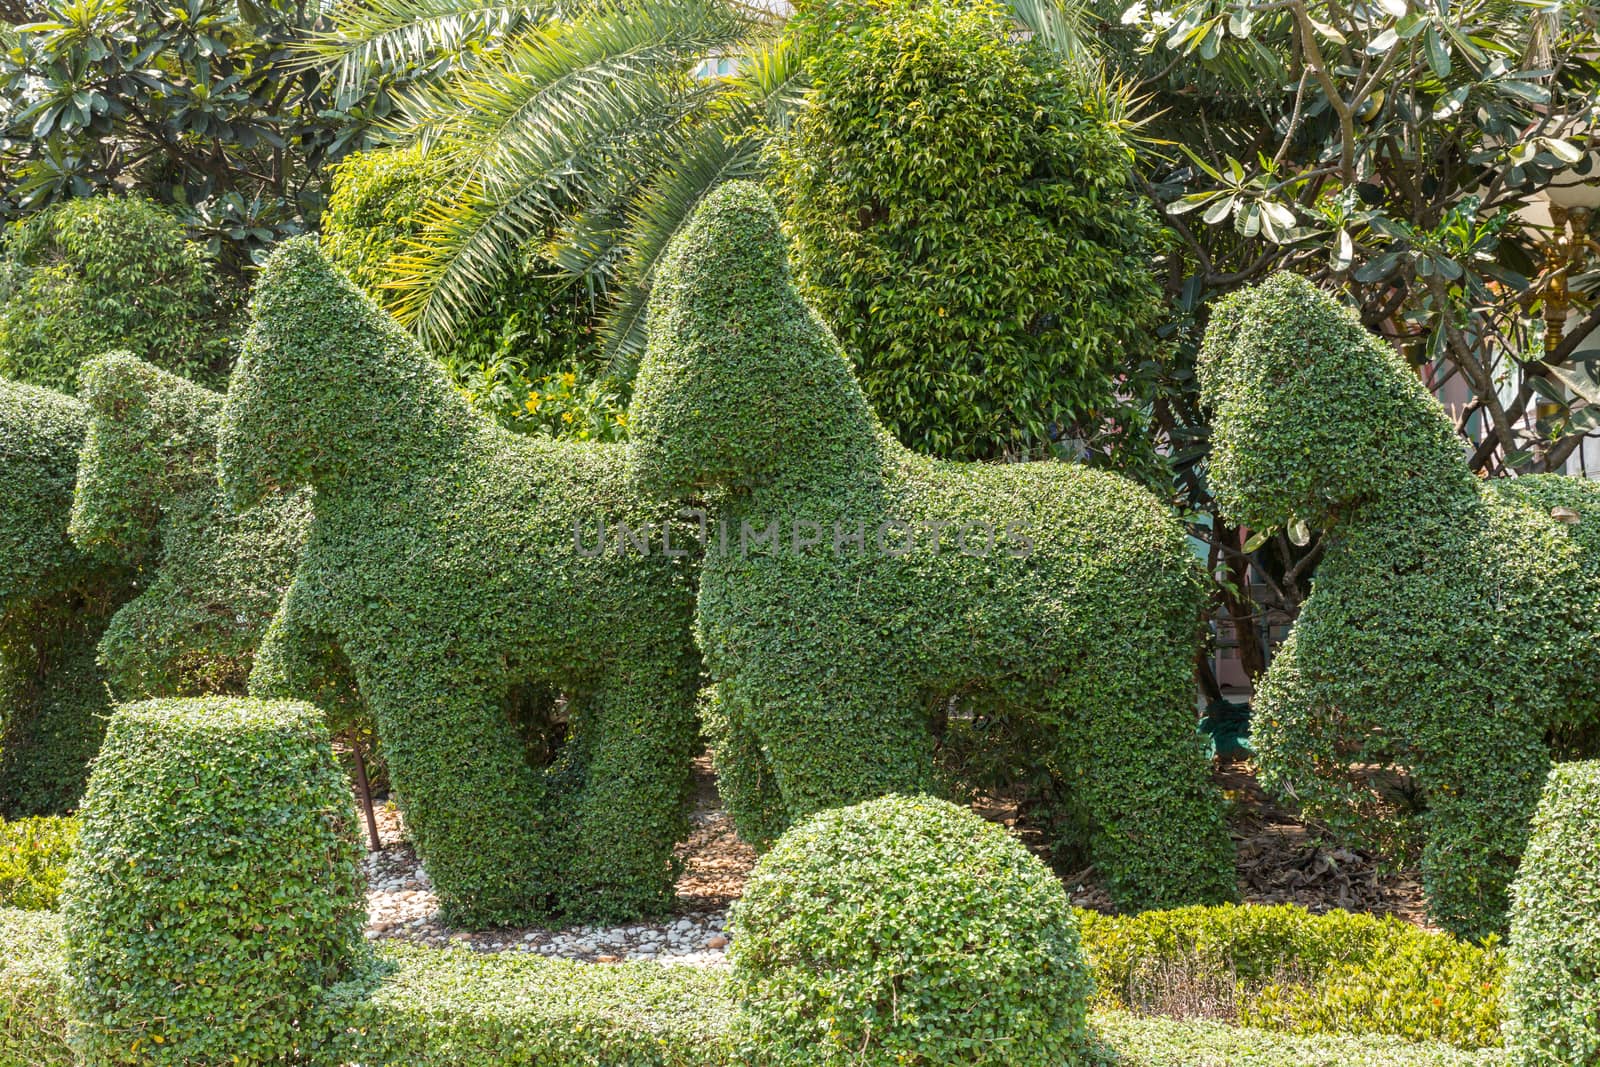 animals carved out of green bushes in the garden